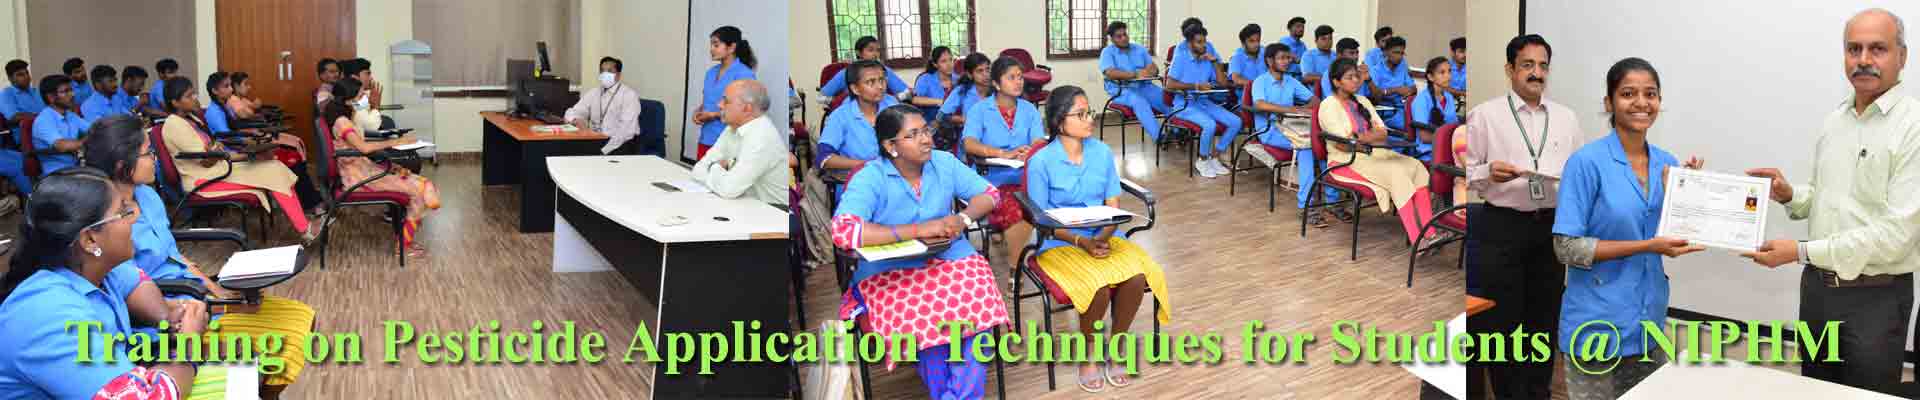 Training on Pesticide Application Techniques for Students @ NIPHM